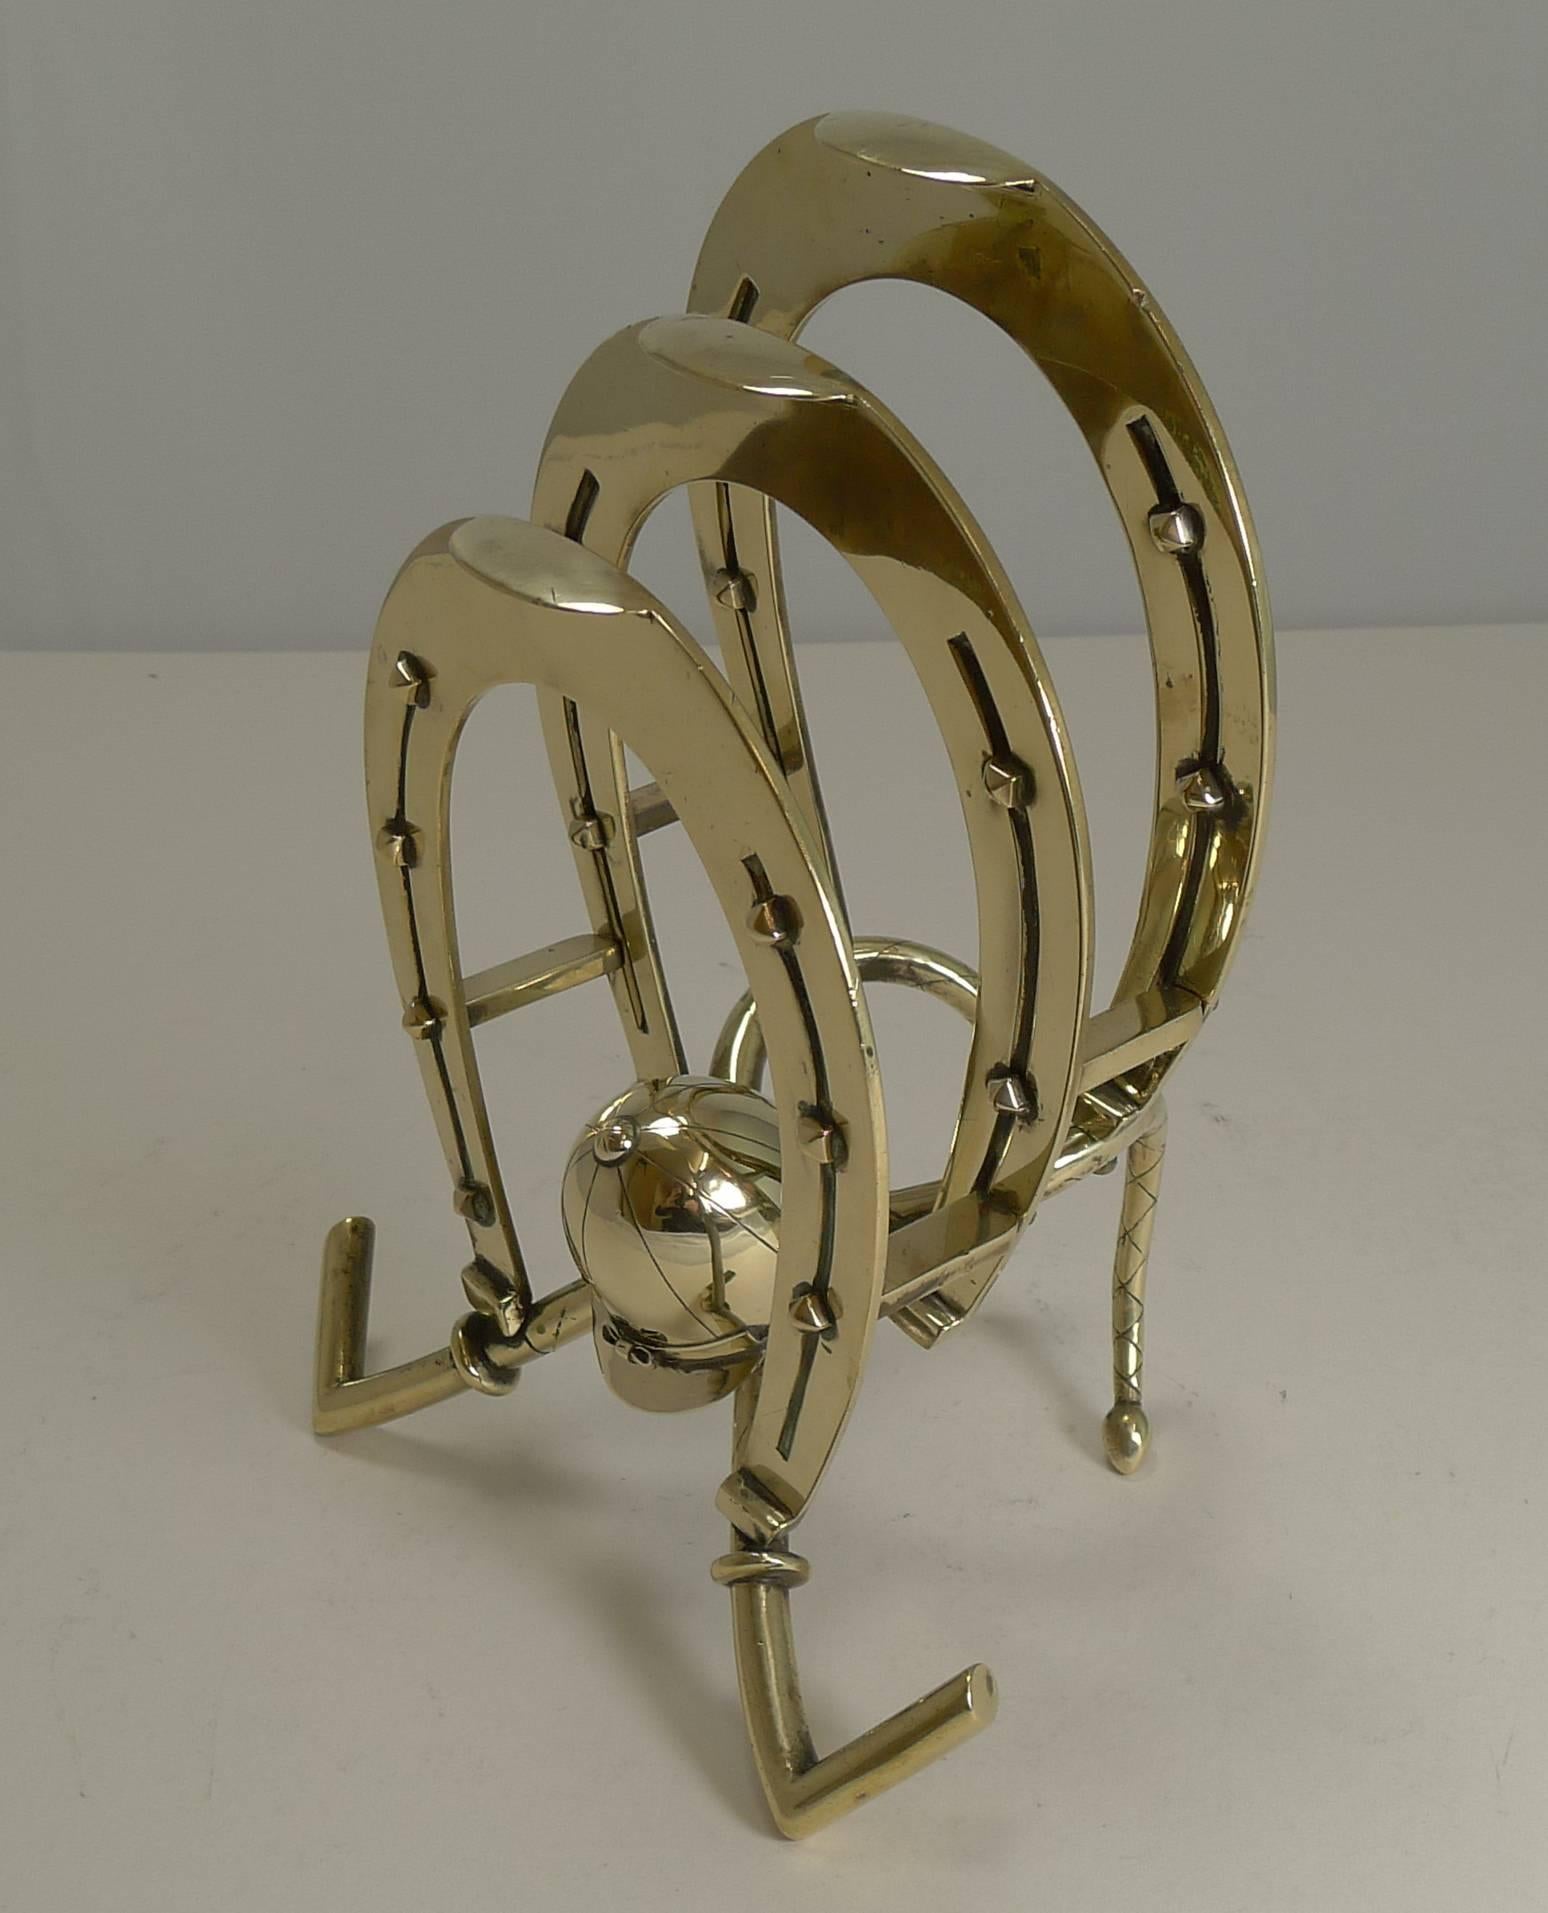 Late Victorian Large Antique English Brass Equestrian Letter or Stationery Holder, circa 1890